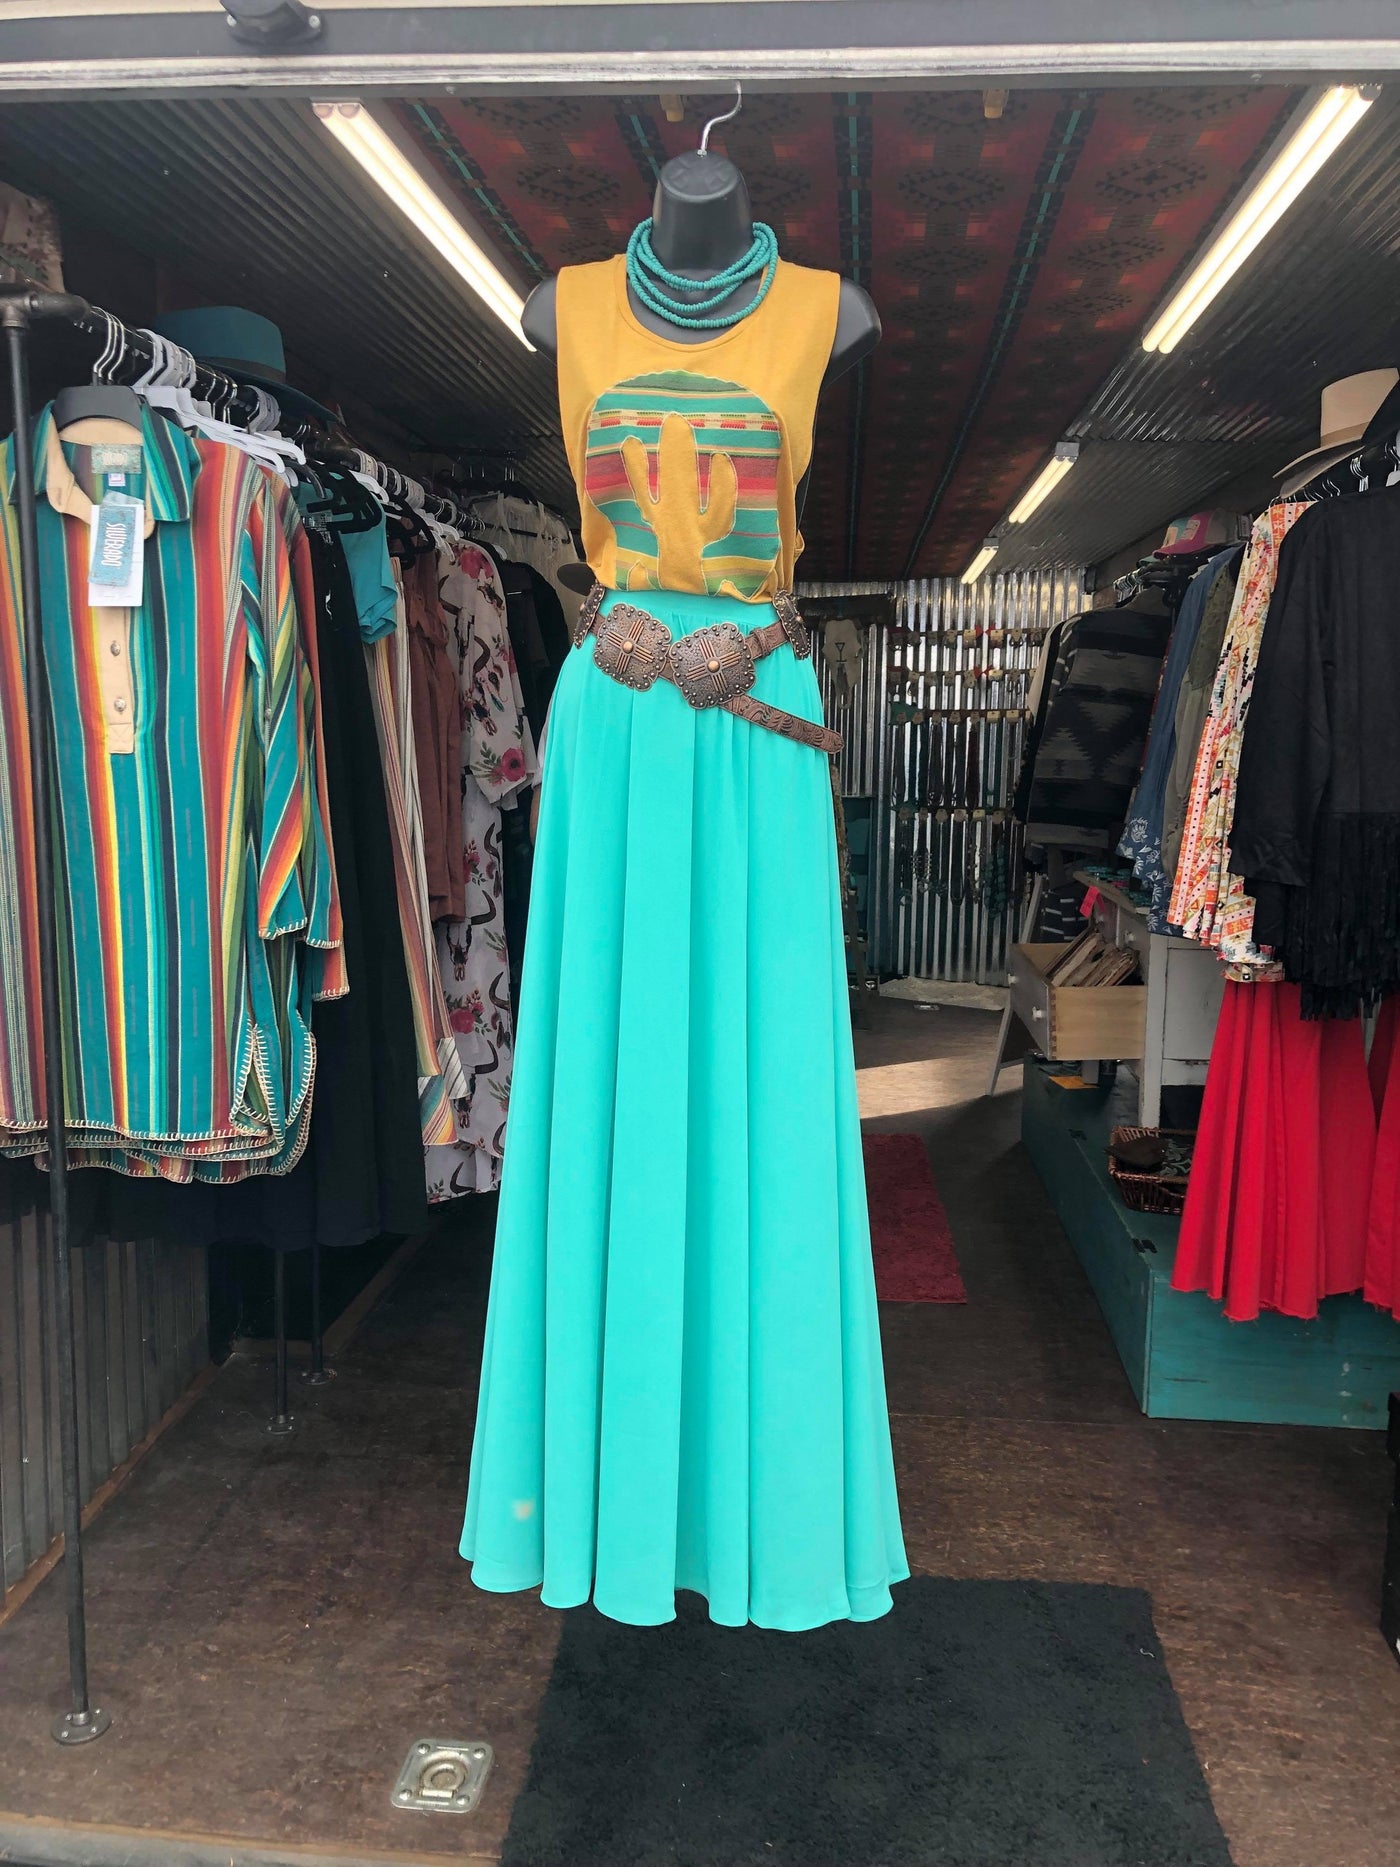 The Treasure Island Turquoise Skirt - Triangle T Boutique